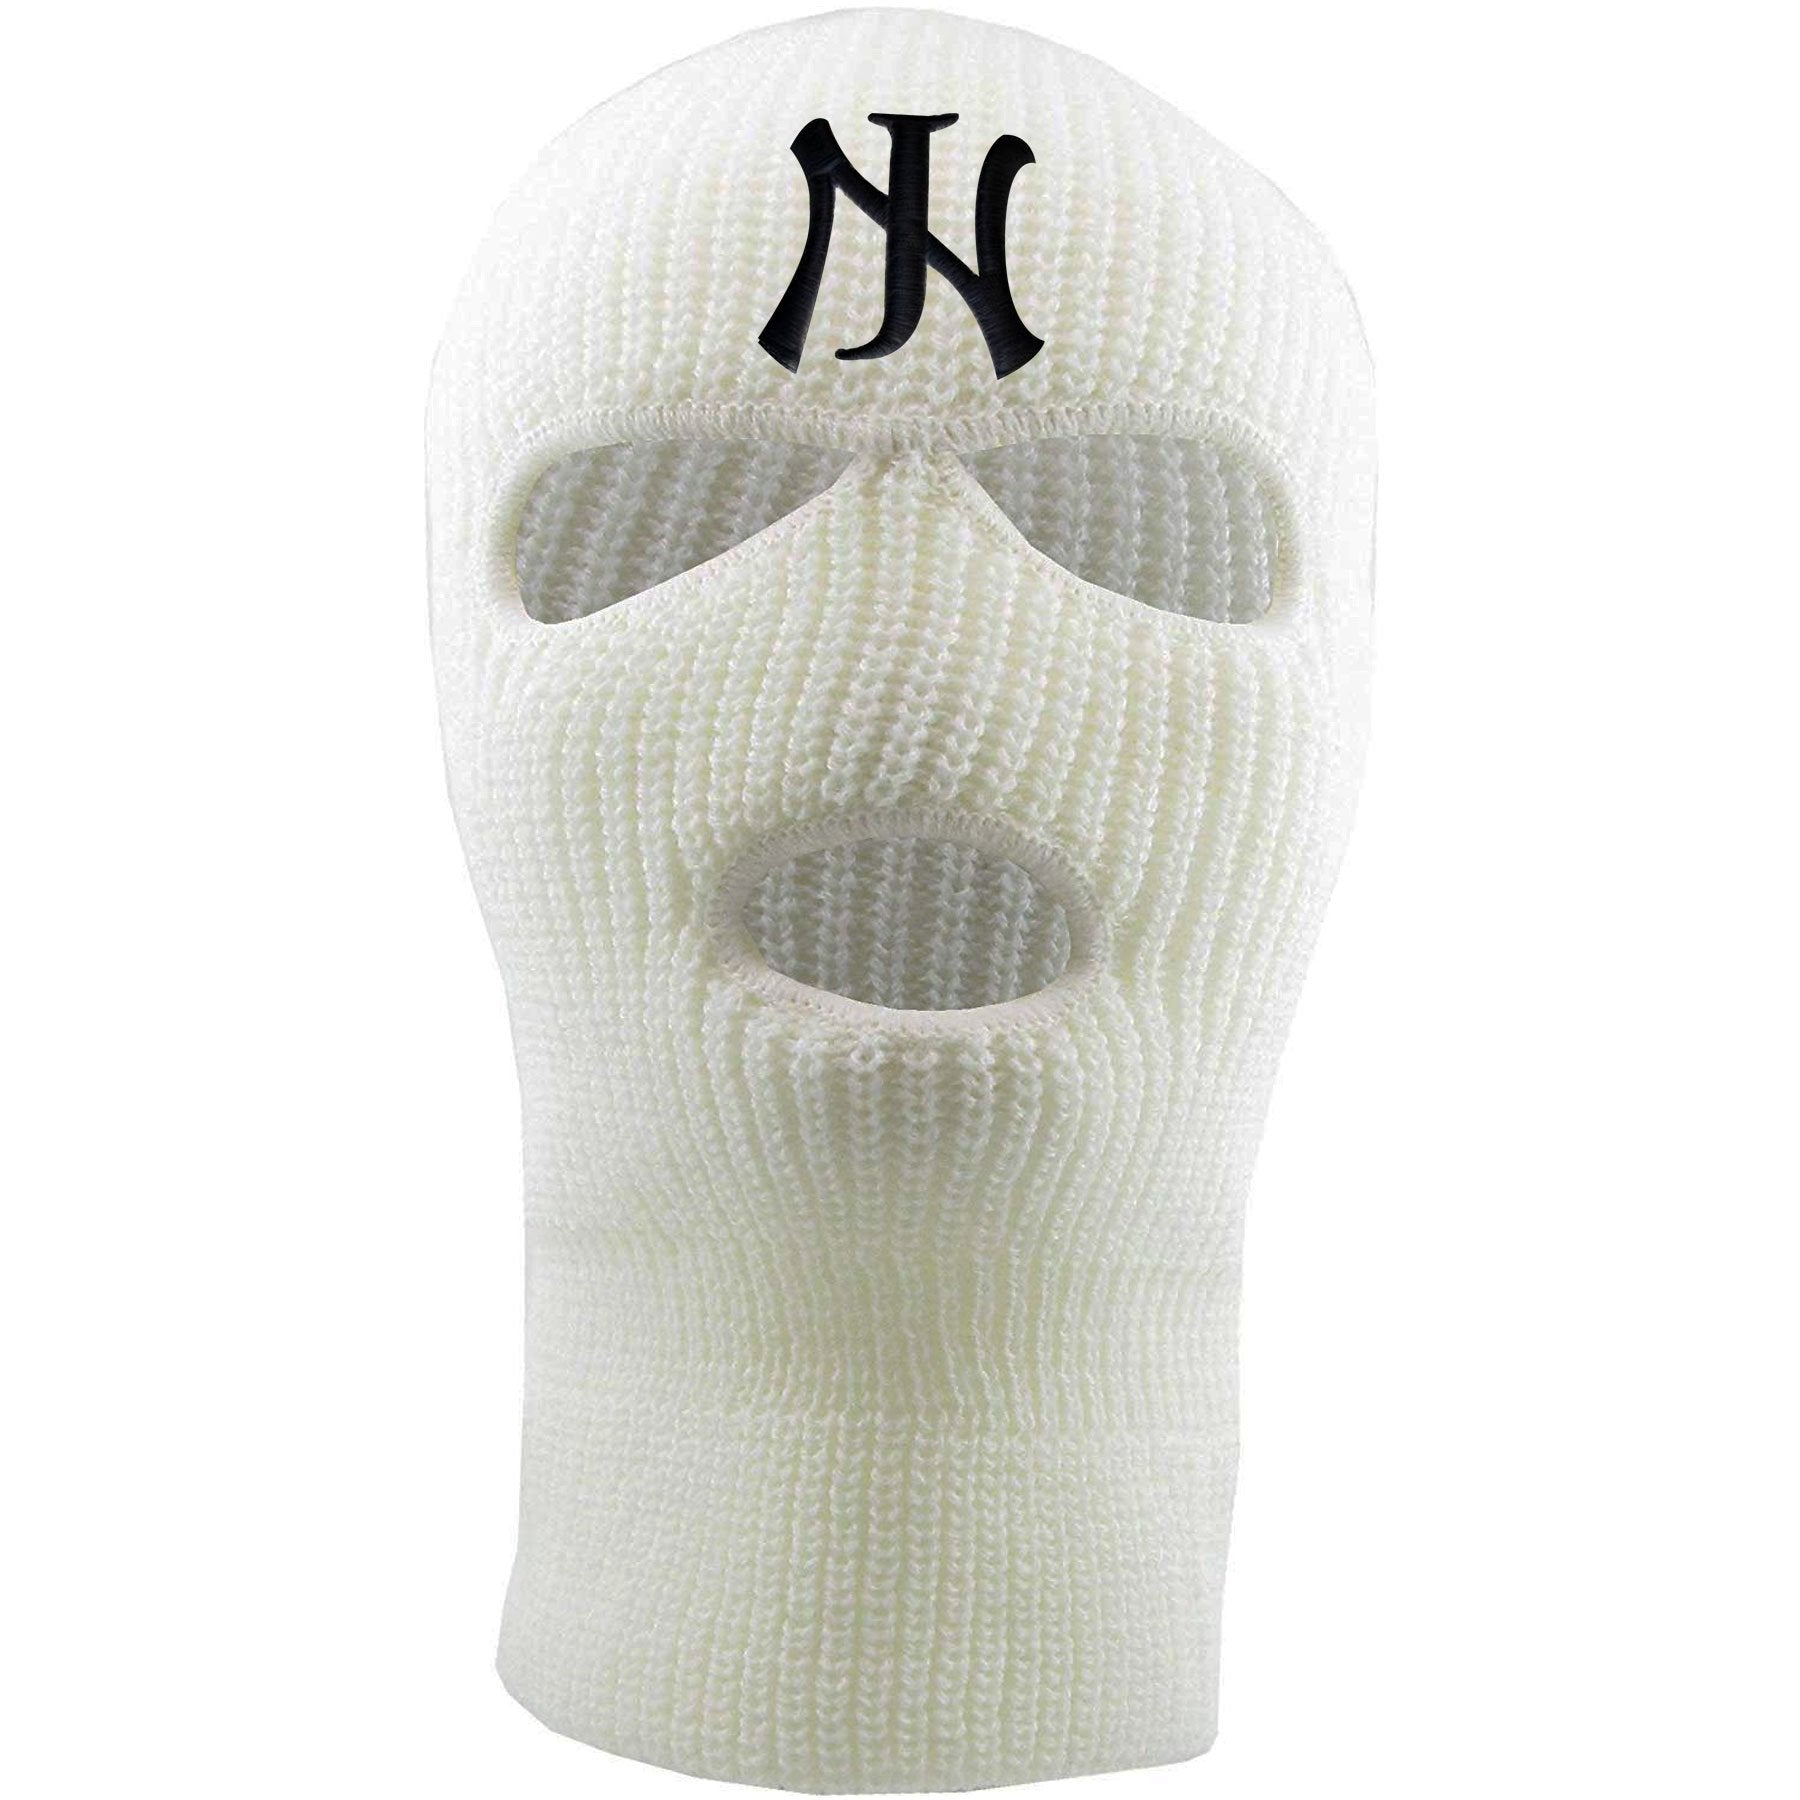 Embroidered on the forehead of the white new jersey ski mask is the NJ logo